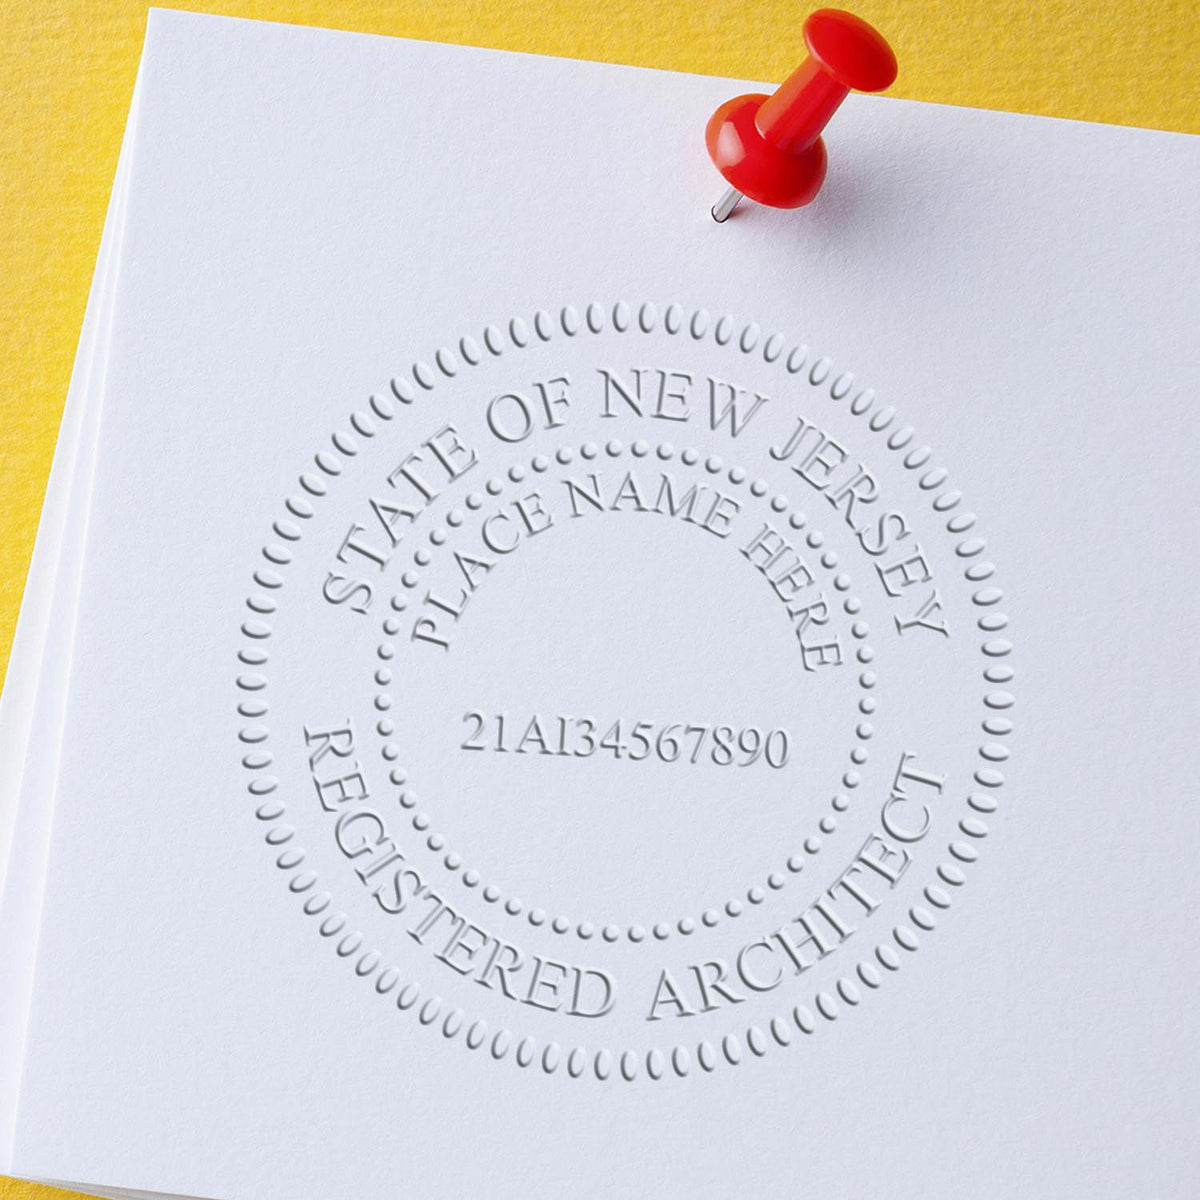 An alternative view of the State of New Jersey Long Reach Architectural Embossing Seal stamped on a sheet of paper showing the image in use